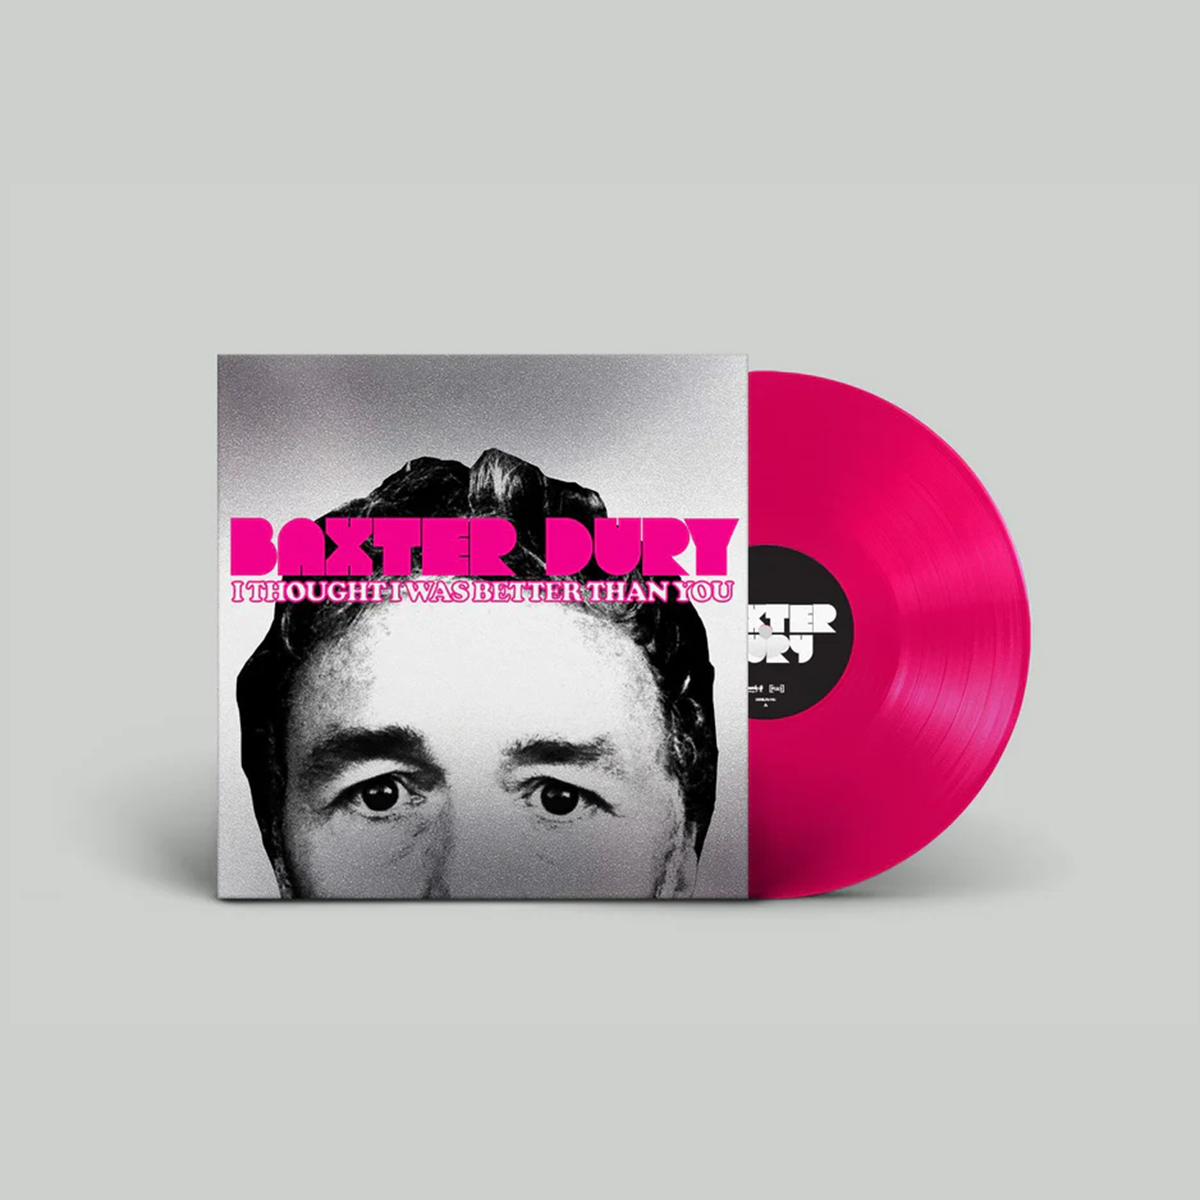 I Thought I Was Better Than You: Limited Opaque Pink Vinyl LP